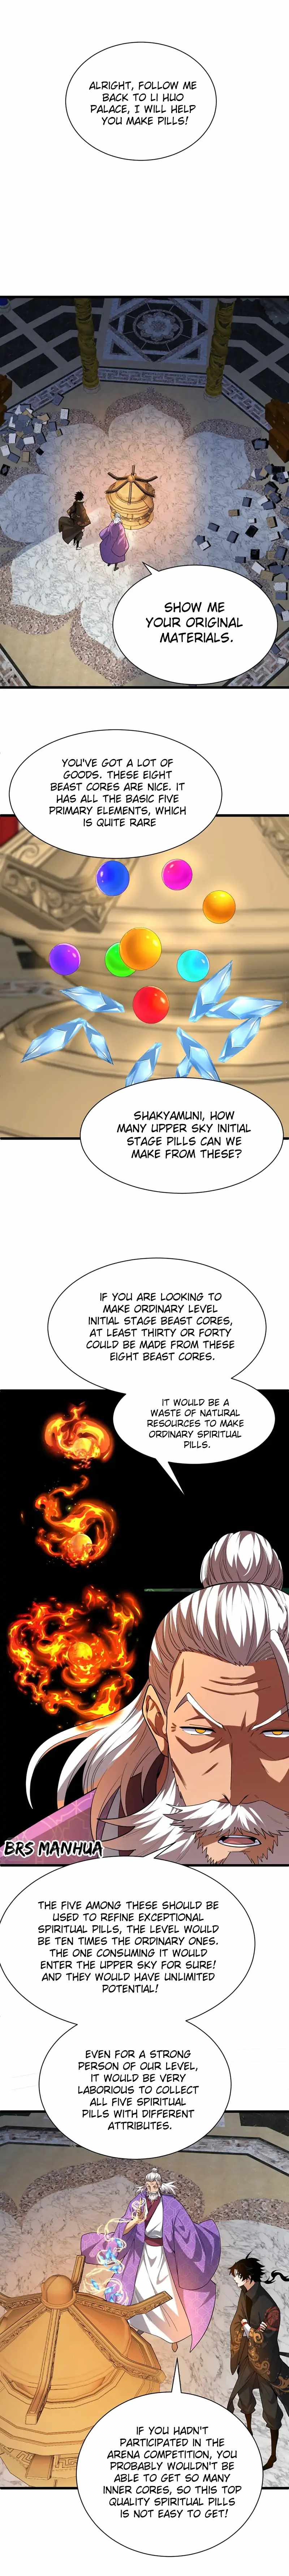 Fighting Again For A Lifetime (Return of the Youngest Grandmaster) Chapter 53-eng-li - Page 14